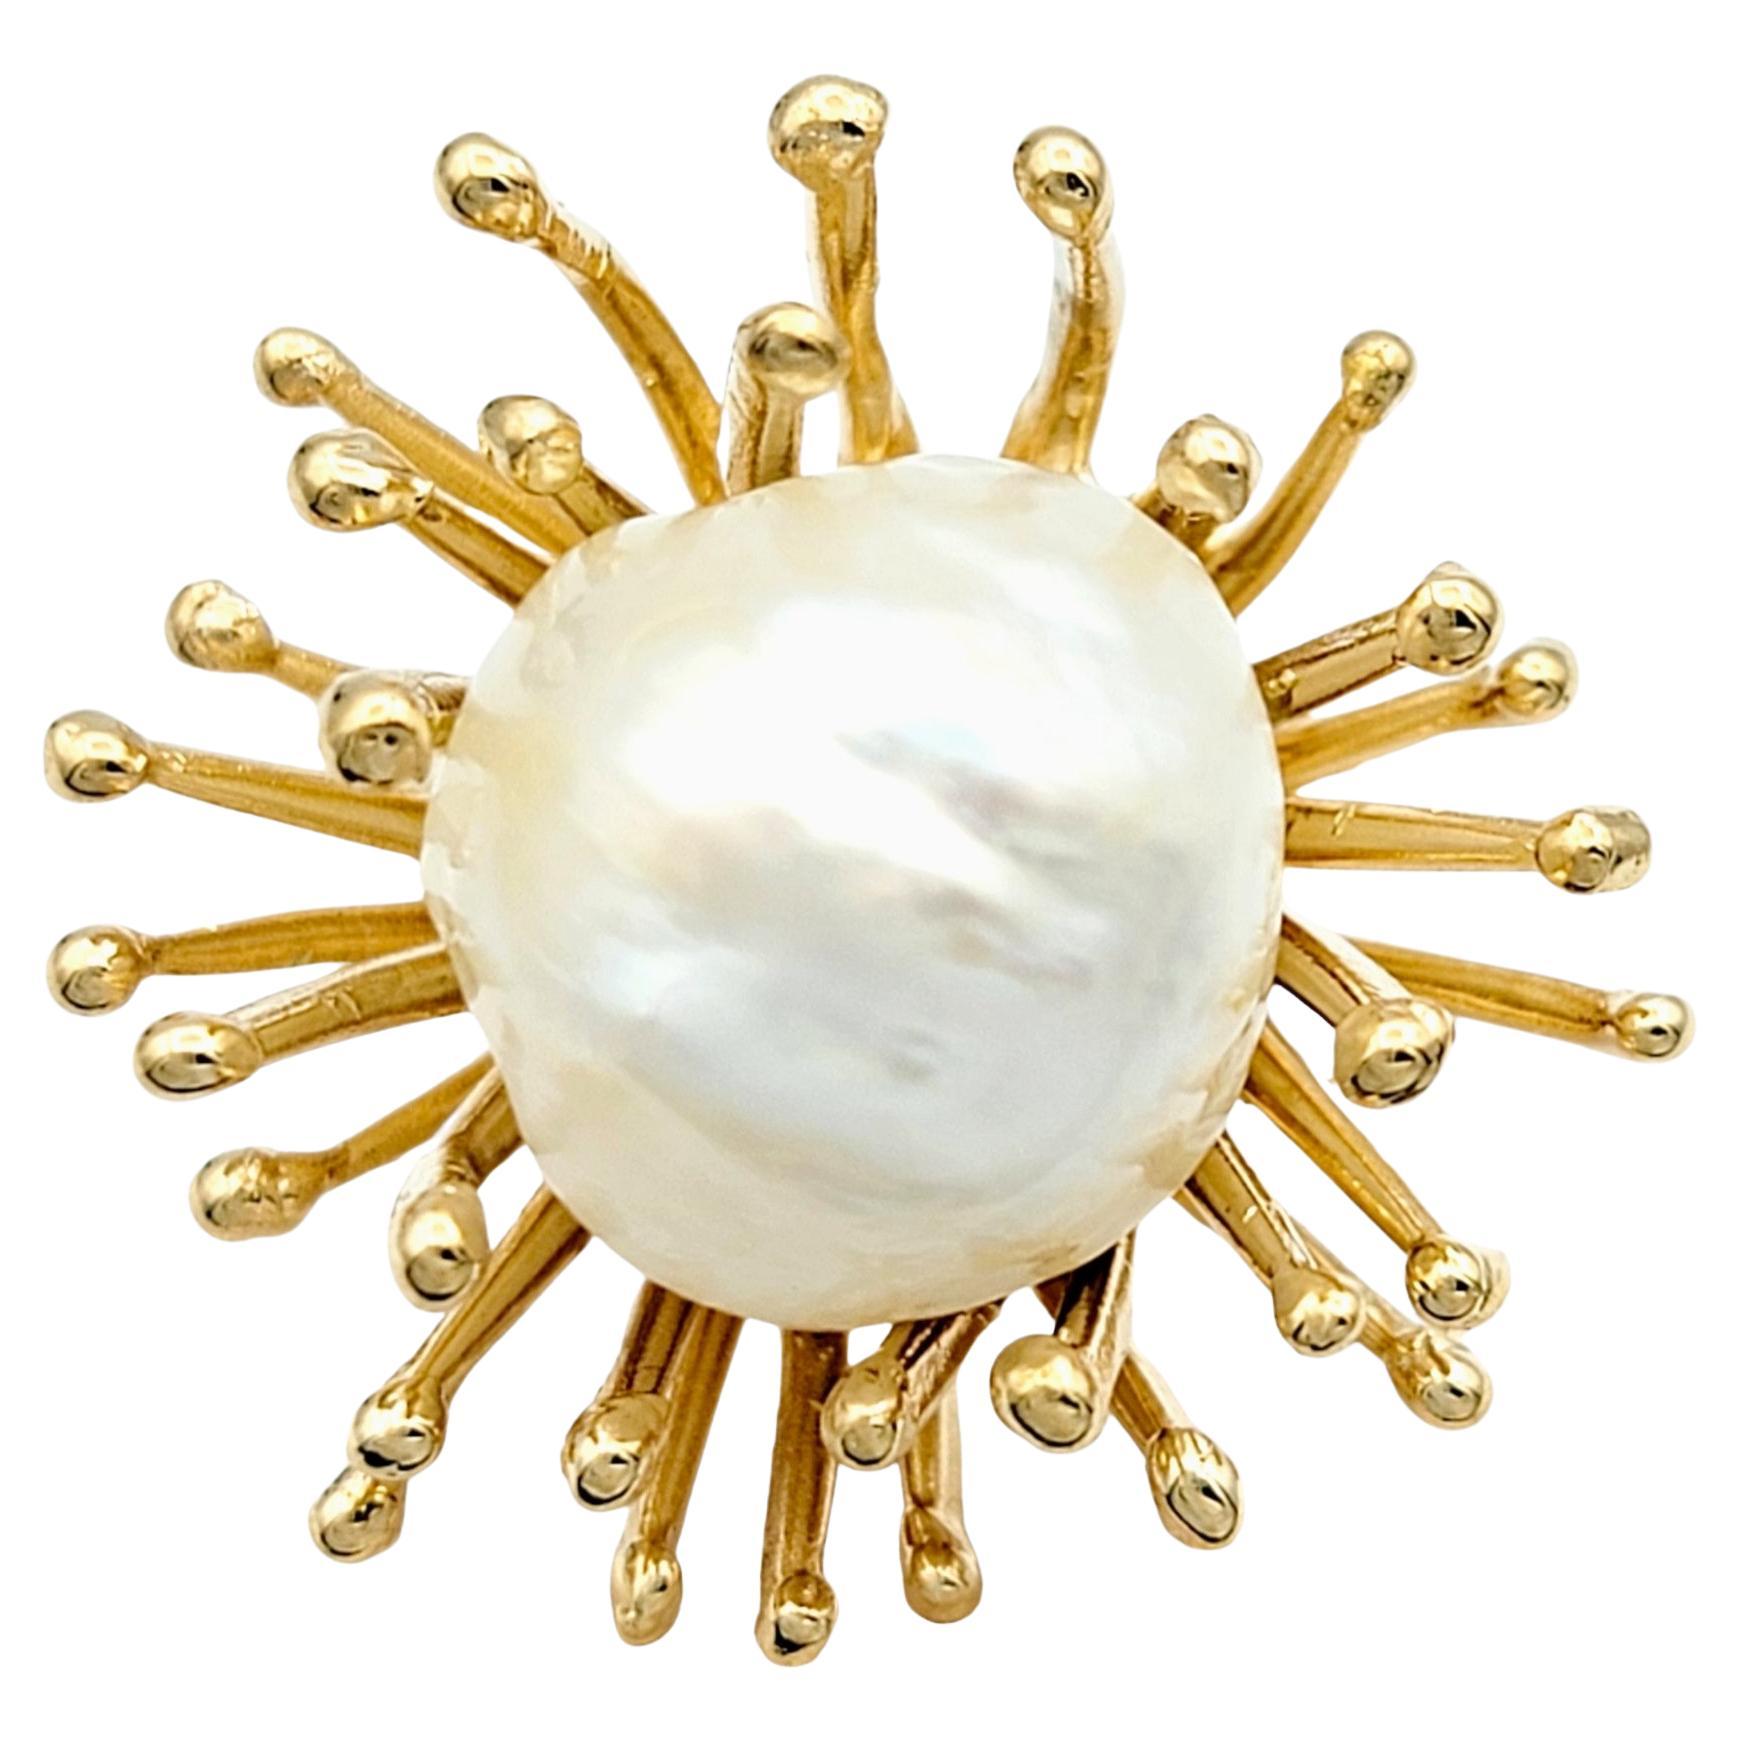 Baroque Cultured Pearl Spiky Spray Motif Cocktail Ring in 18 Karat Yellow Gold